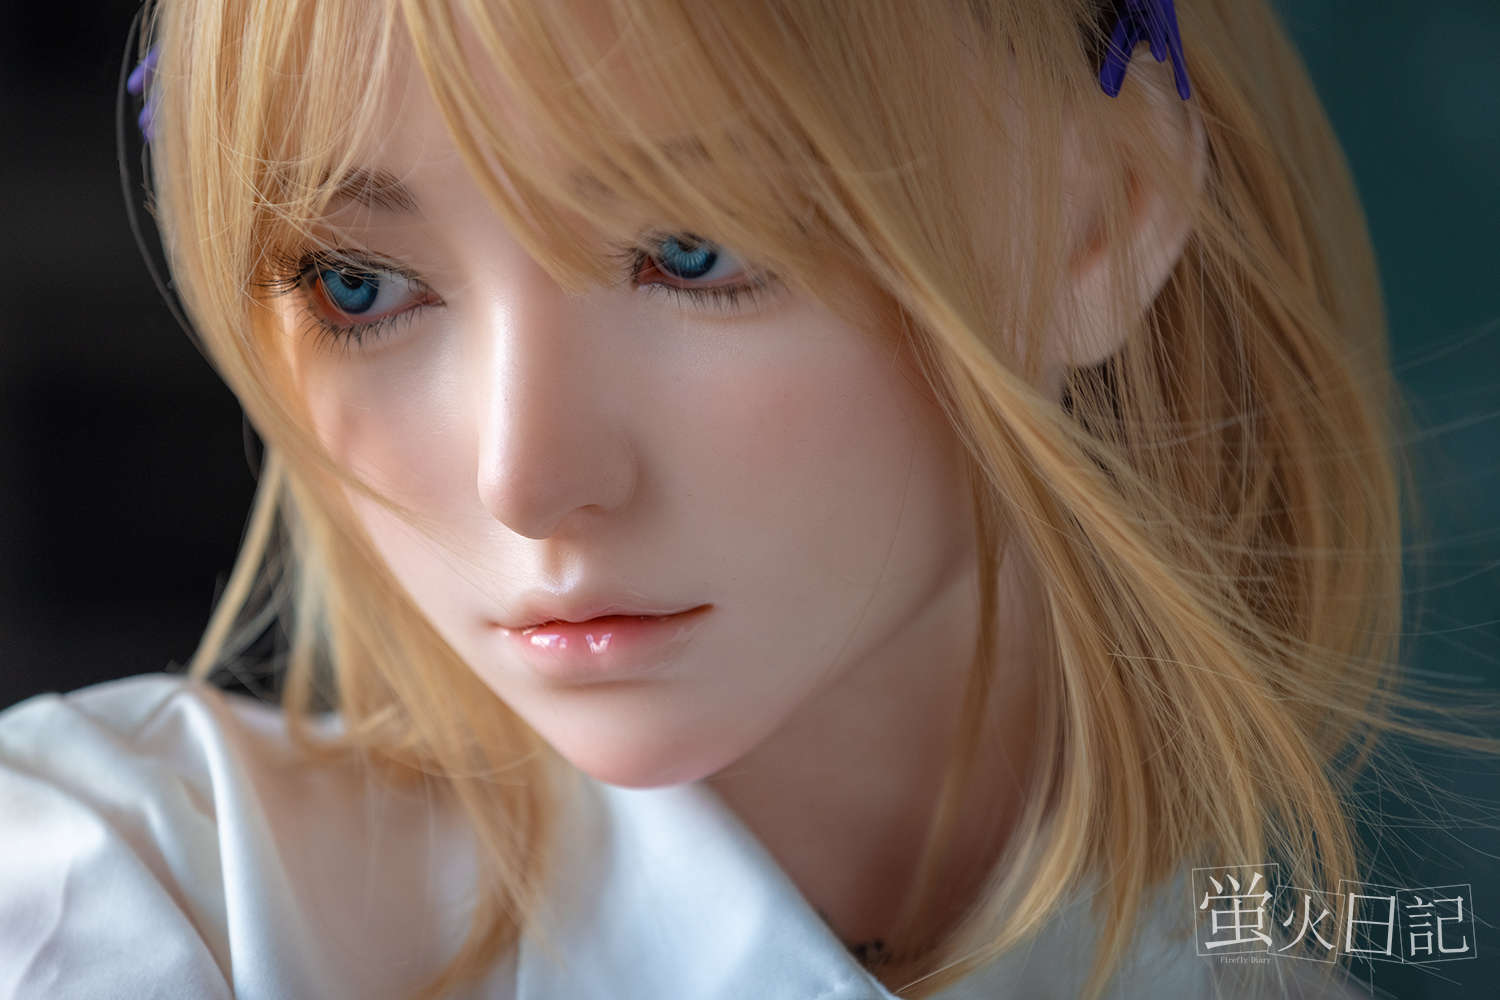 Firefly Diary Doll 164 cm Silicone - Xi Feng